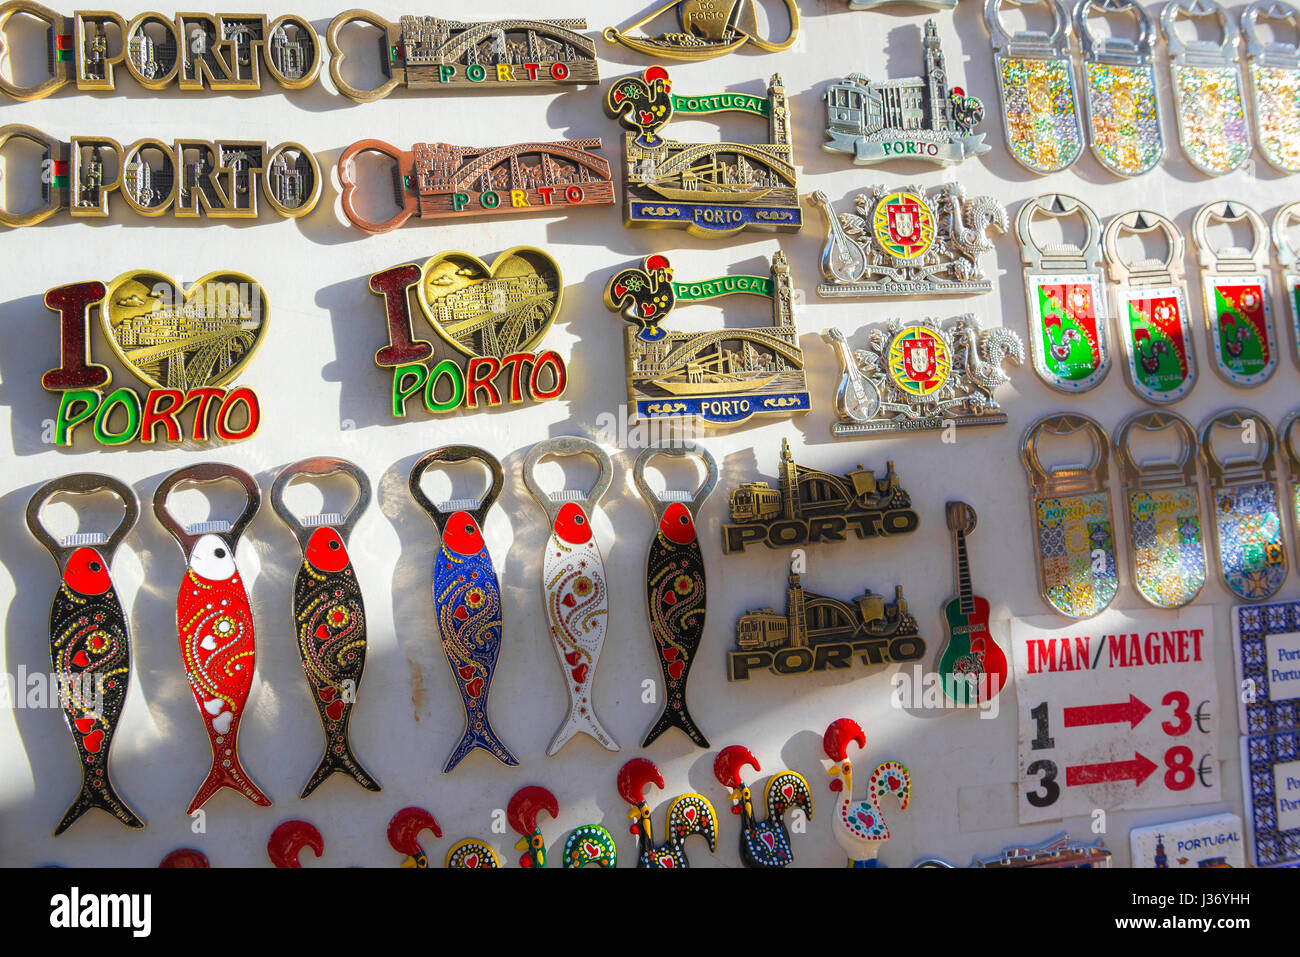 Porto Portugal shop, view of a display of colourful souvenirs outside a  shop in the Ribeira area of Porto, Portugal, Europe Stock Photo - Alamy